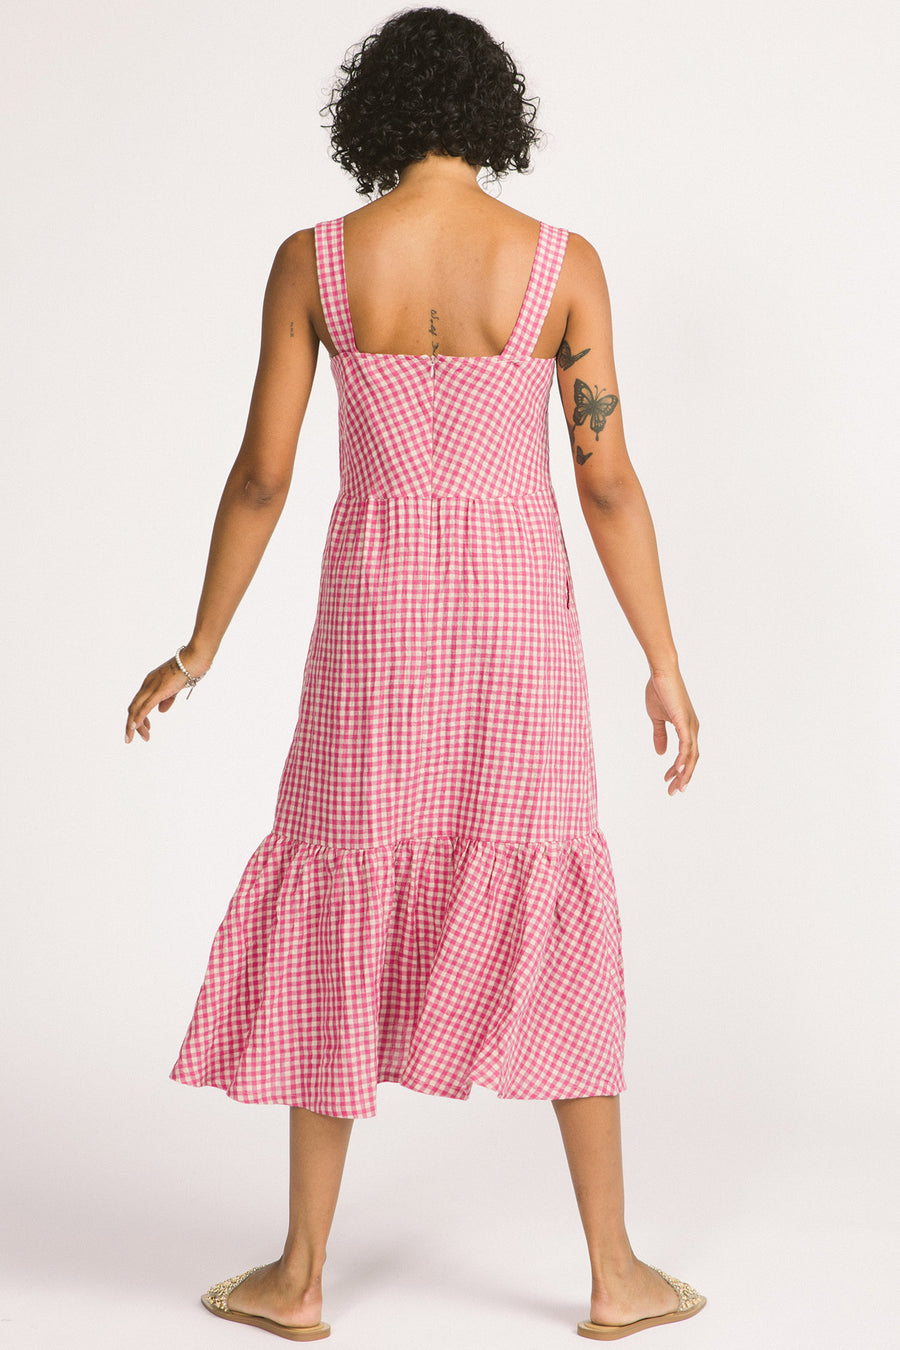 Back view of woman wearing pink and white linen gingham tiered Calista summer dress by Allison Wonderland. 